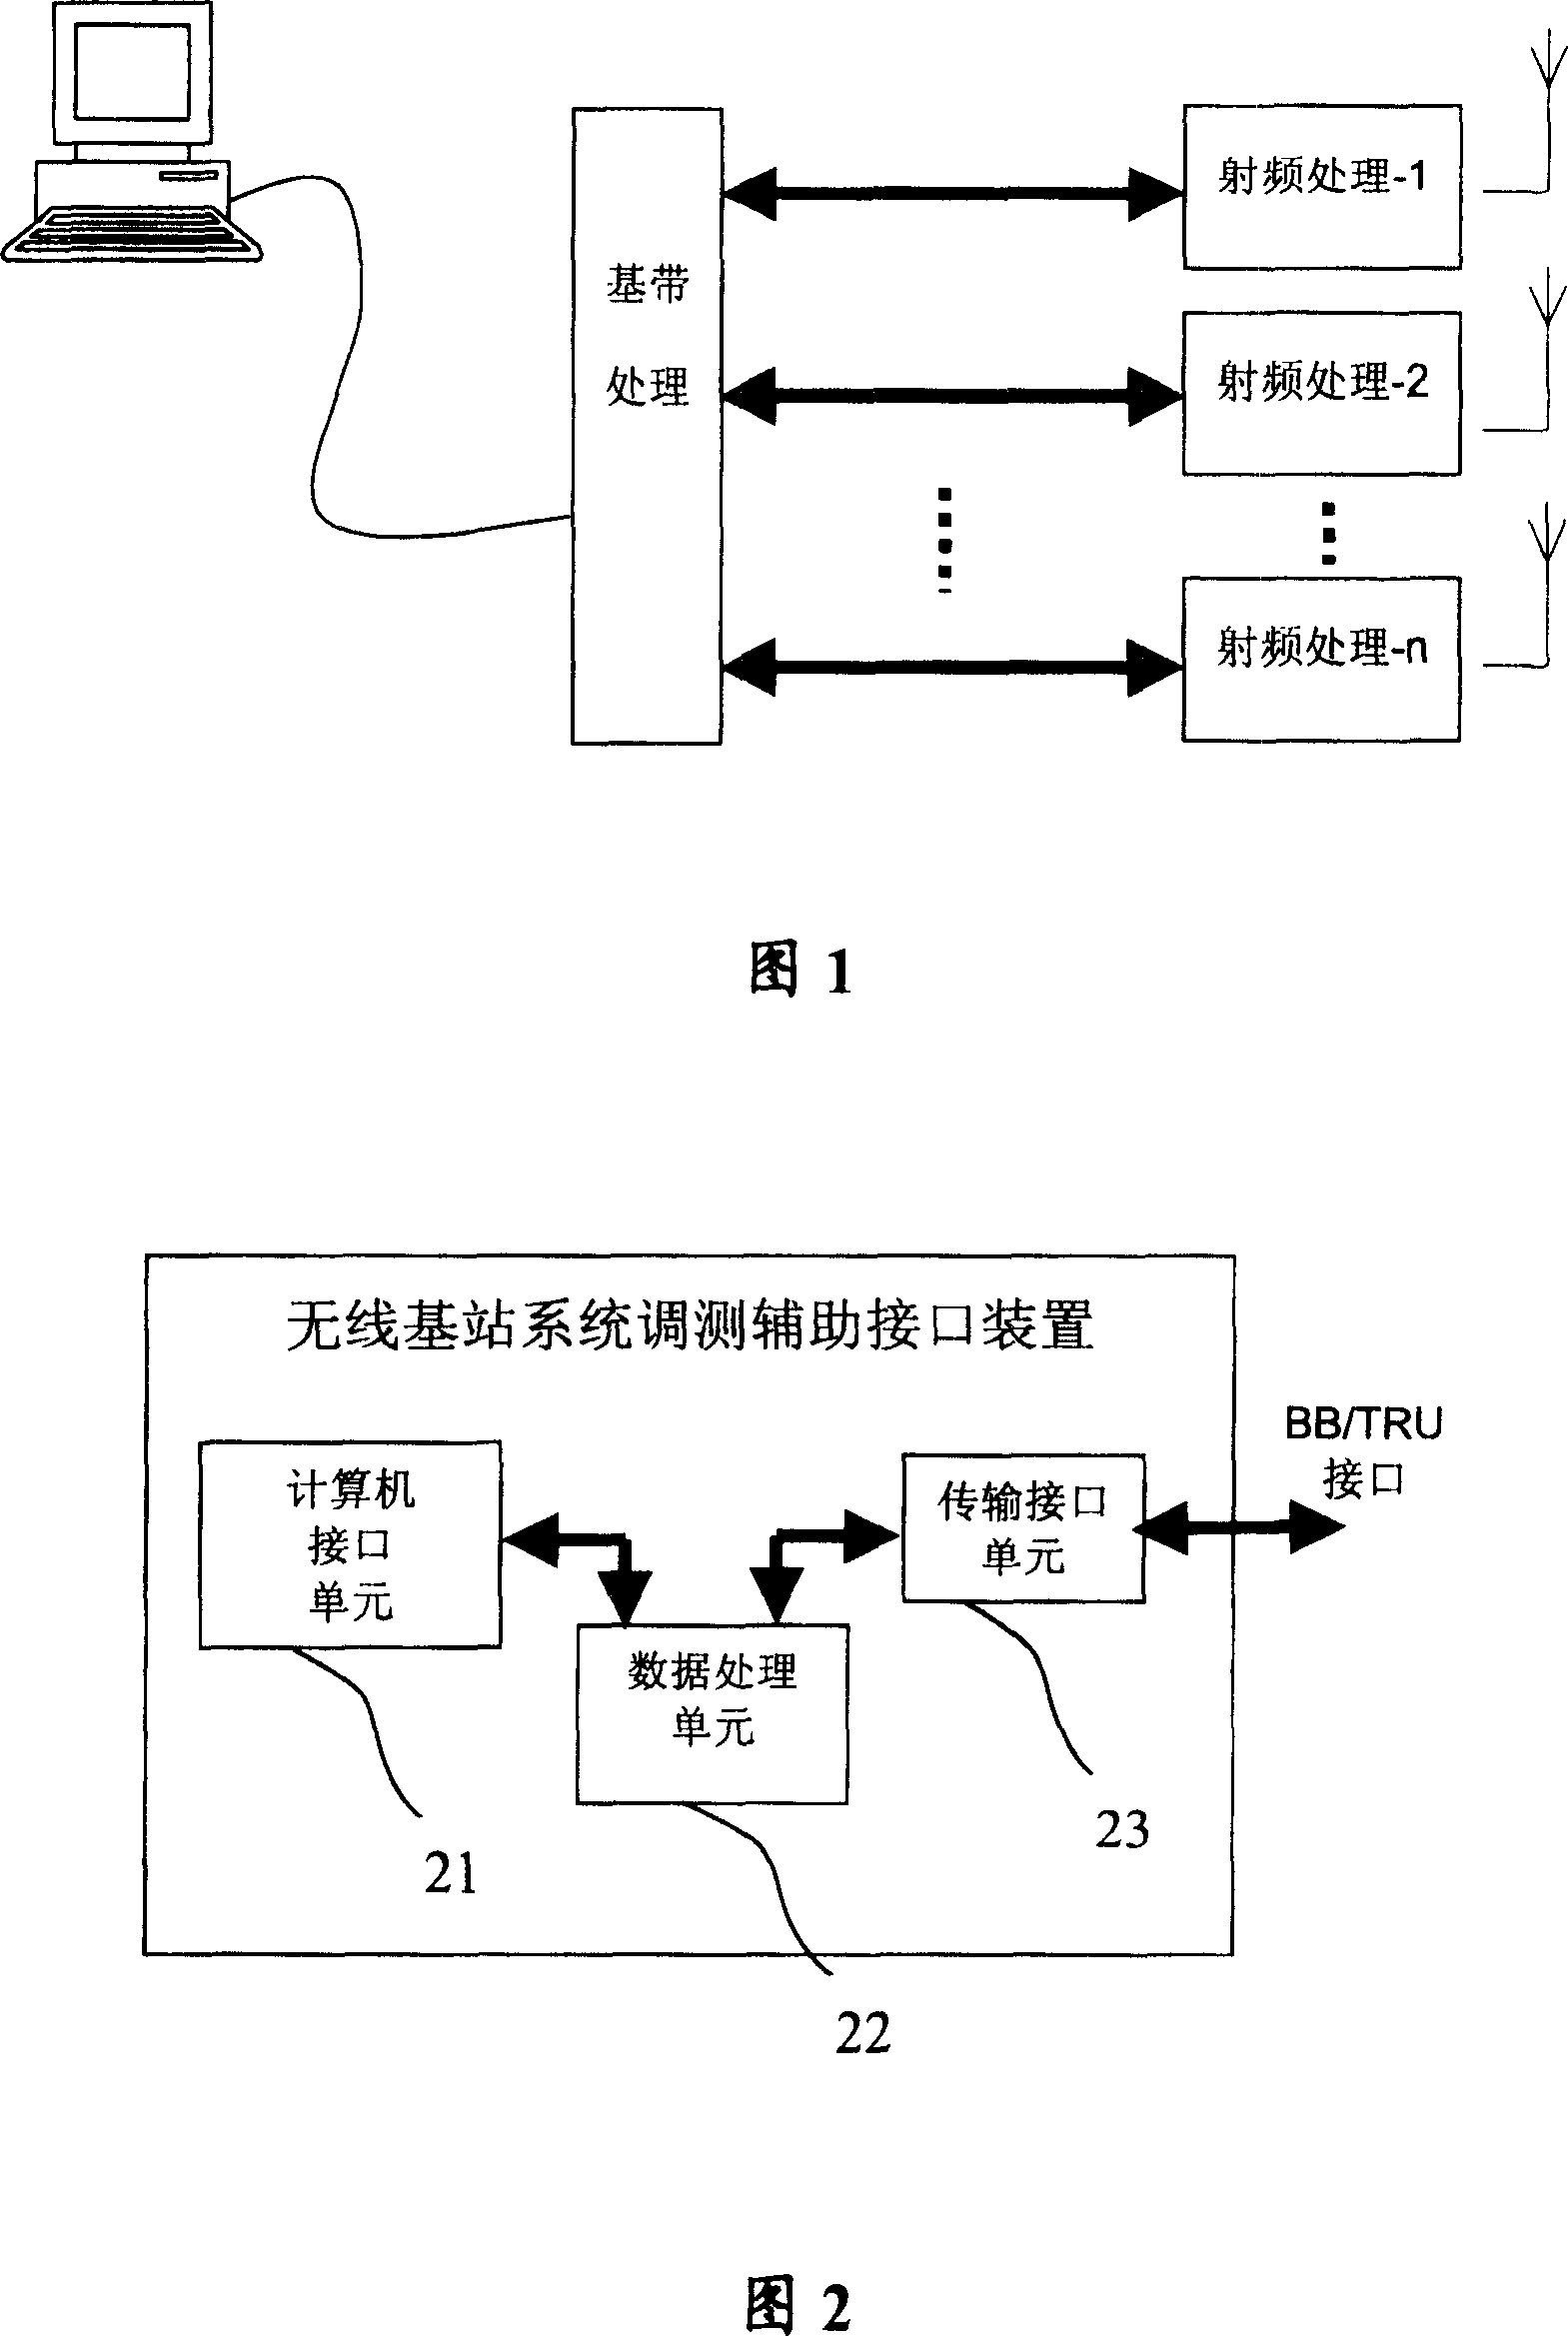 Reglation testing axiliary interface device of radio base station and testing system using it